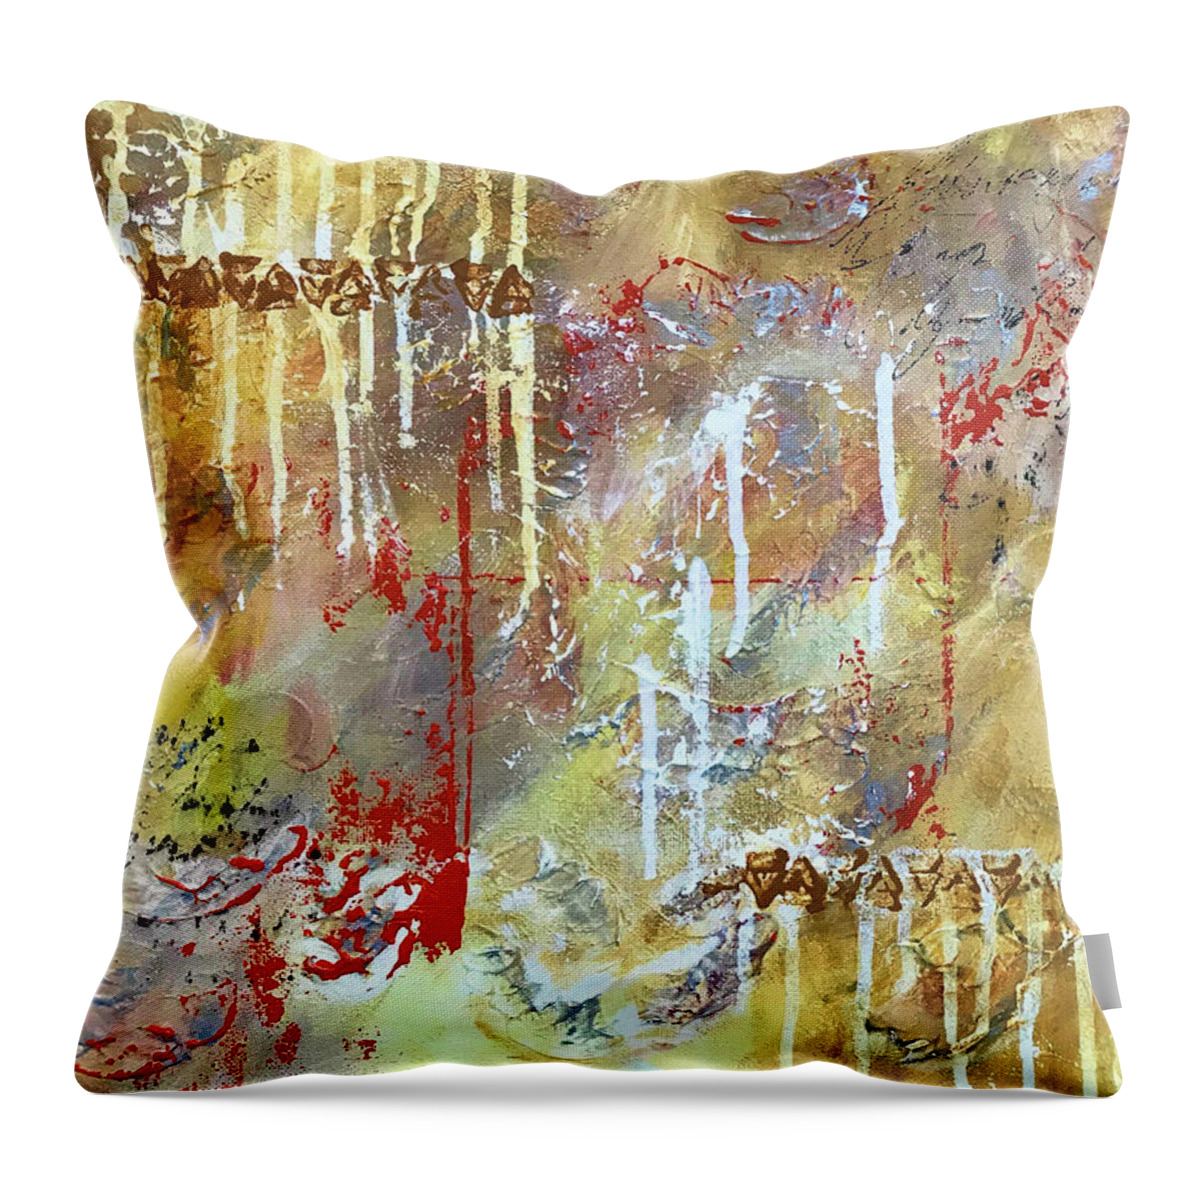 Abstract Throw Pillow featuring the painting Mirage by Art by Gabriele